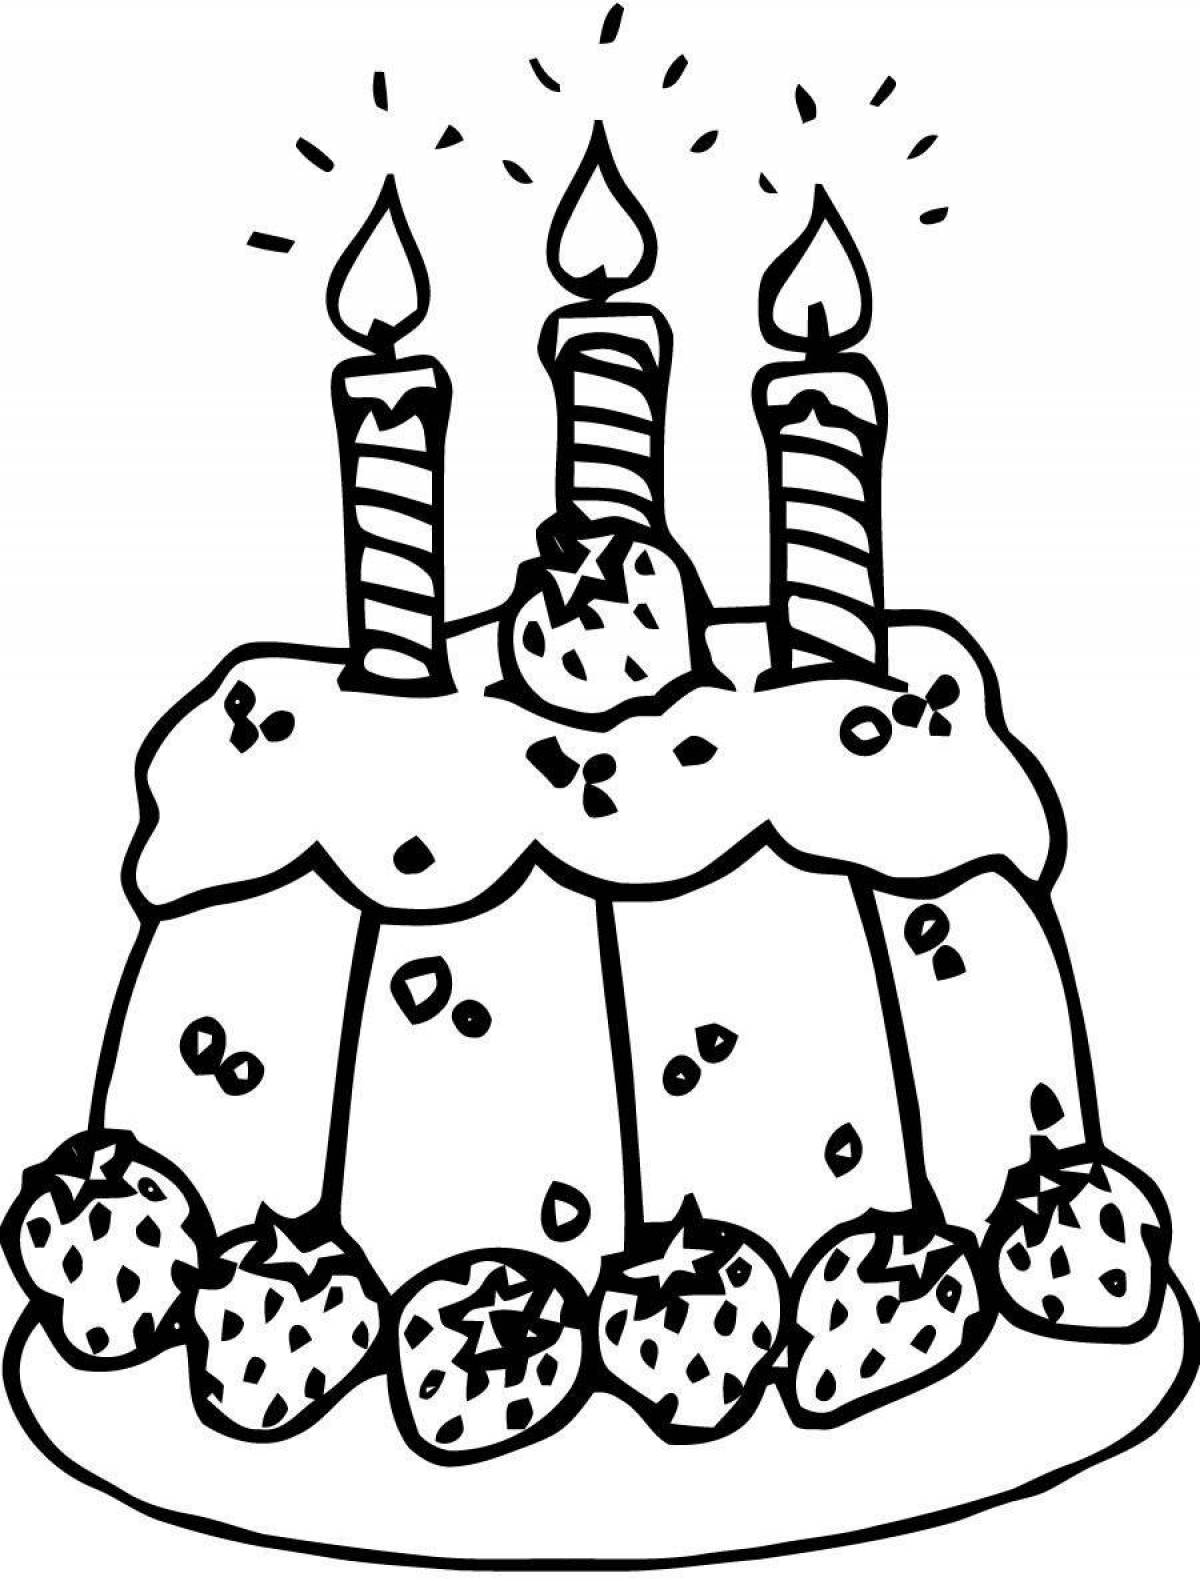 Color-fiesta cakes coloring page for kids